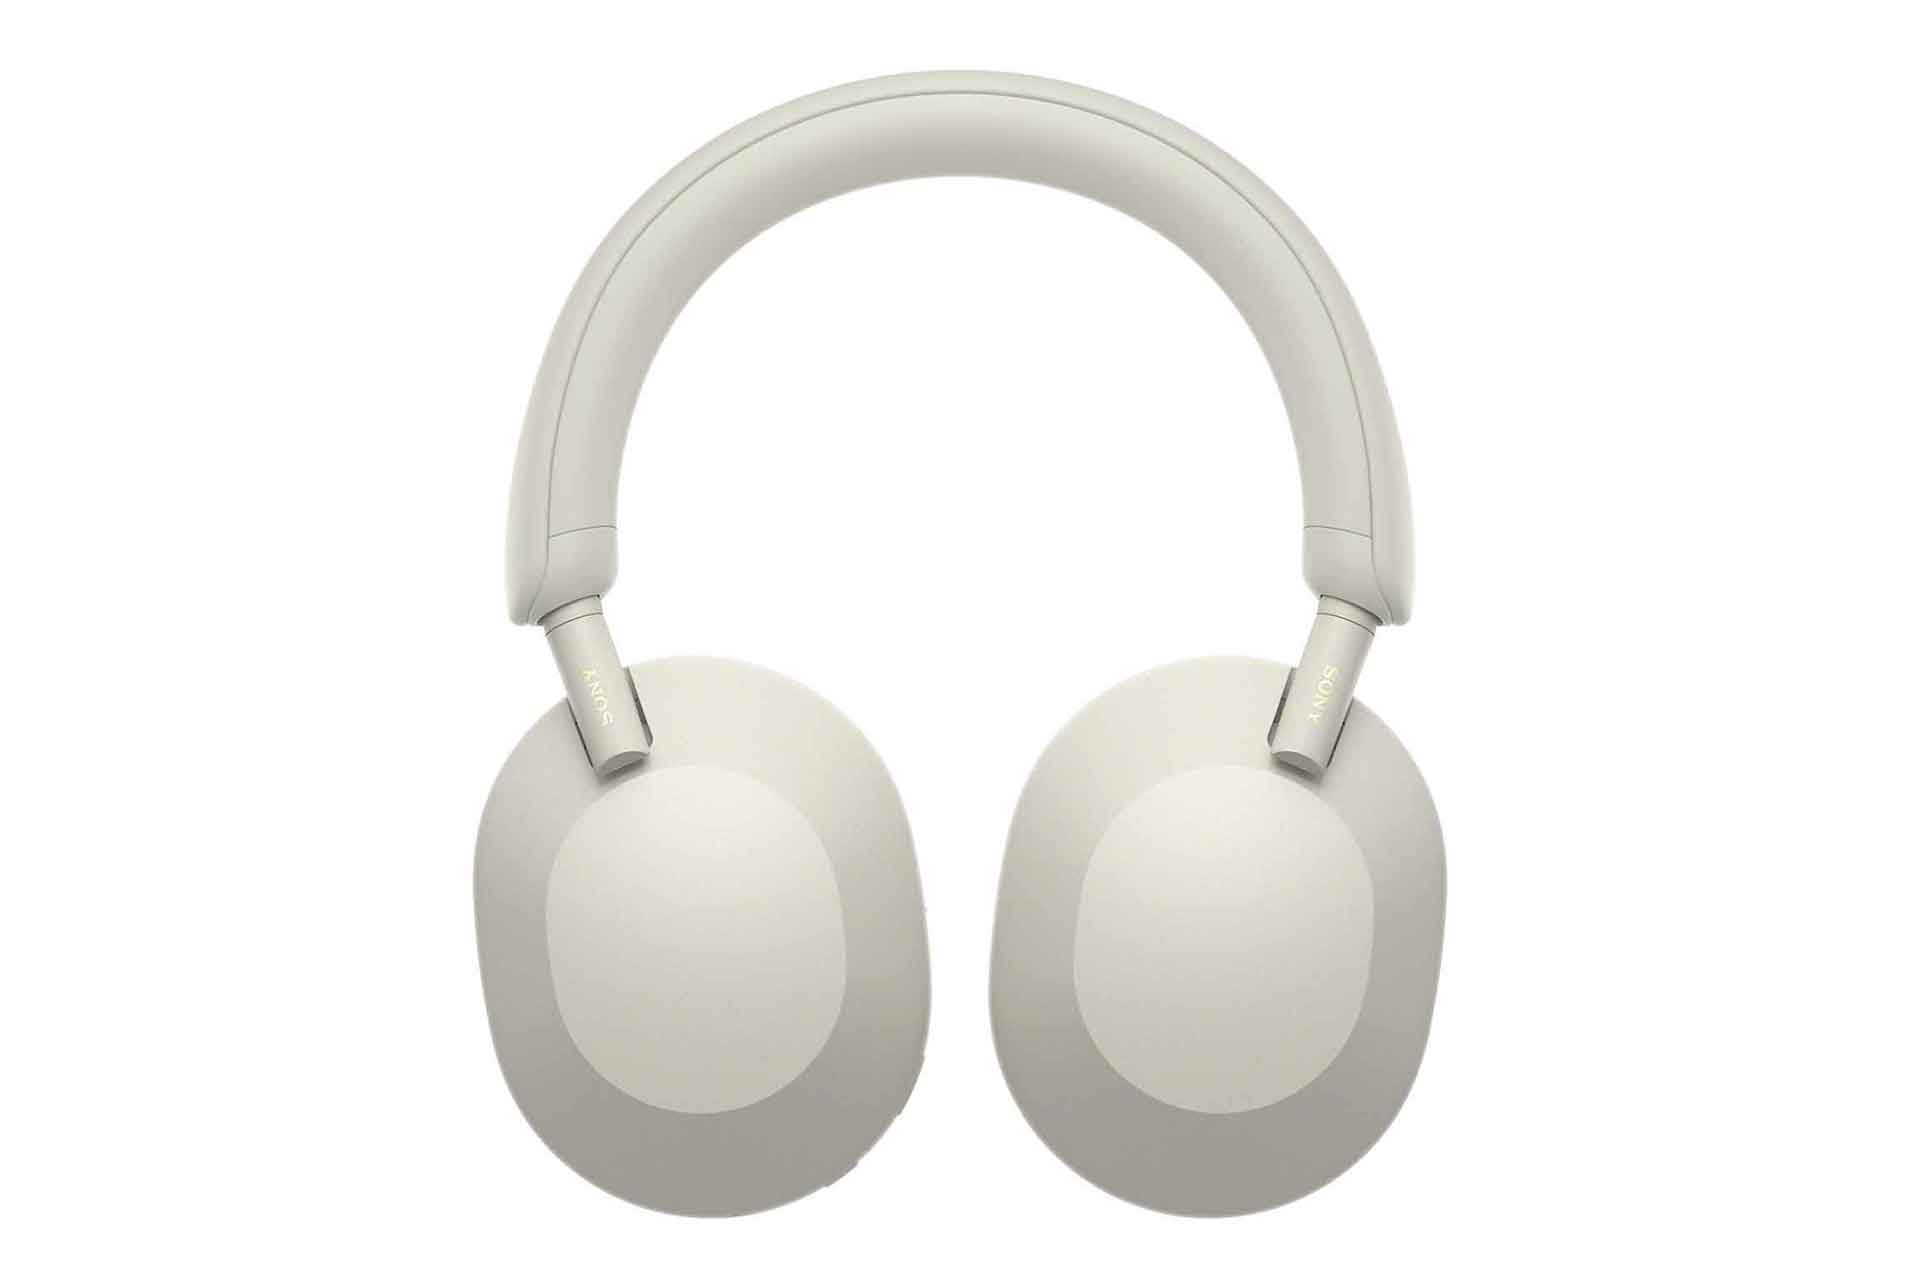 Sony WH-1000XM5 Wireless Over-The-Ear Headphones Reviewed - Future